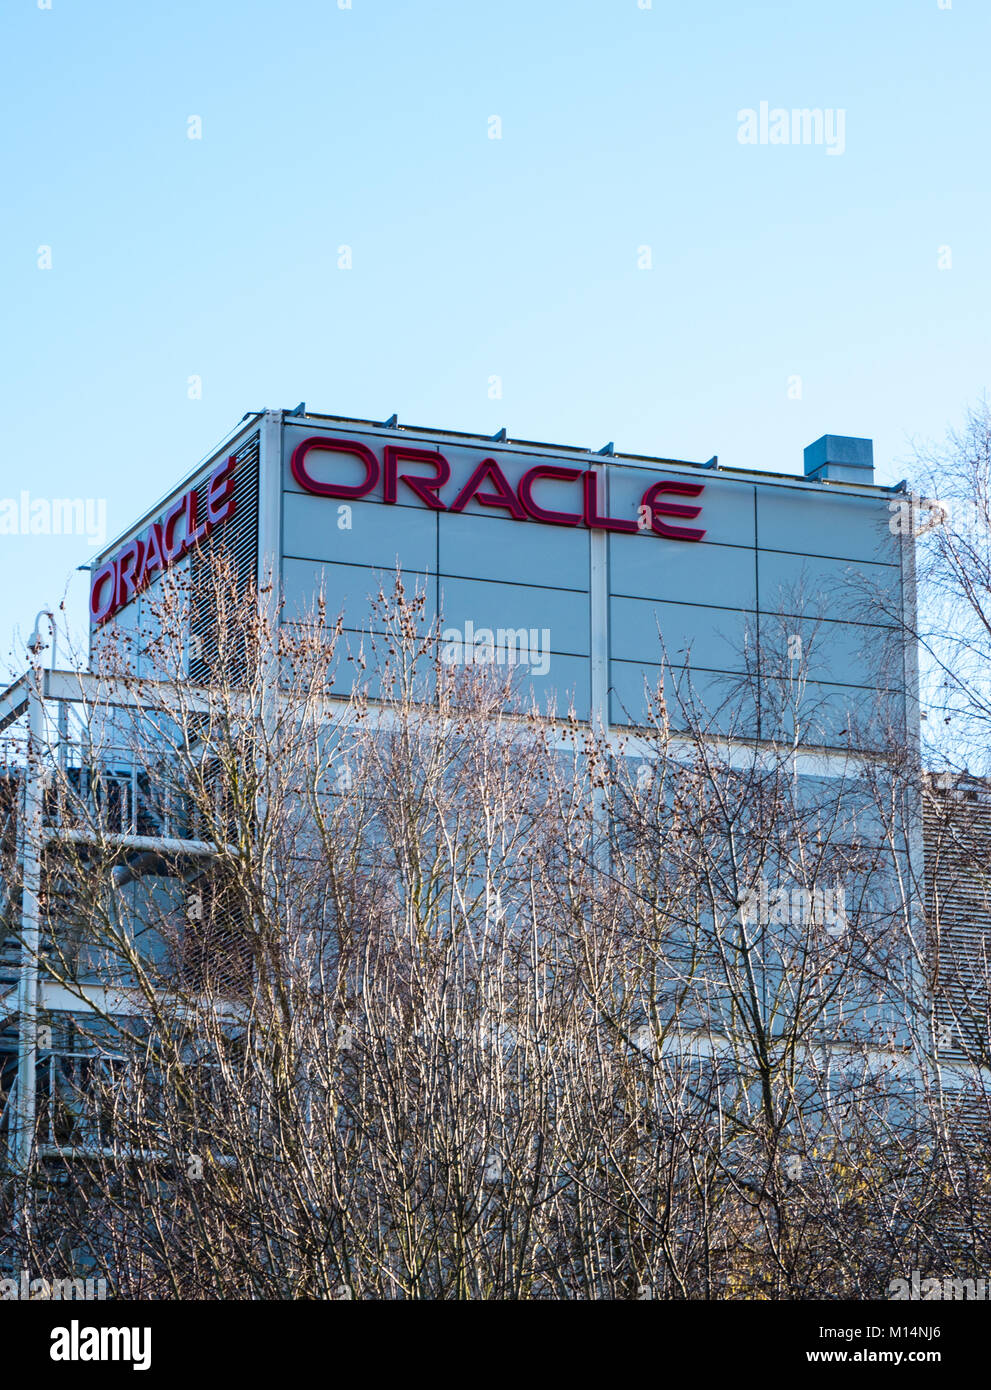 Oracle Corporation UK Head Office, Thames Valley Business Park, Reading, Berkshire, England Stockfoto